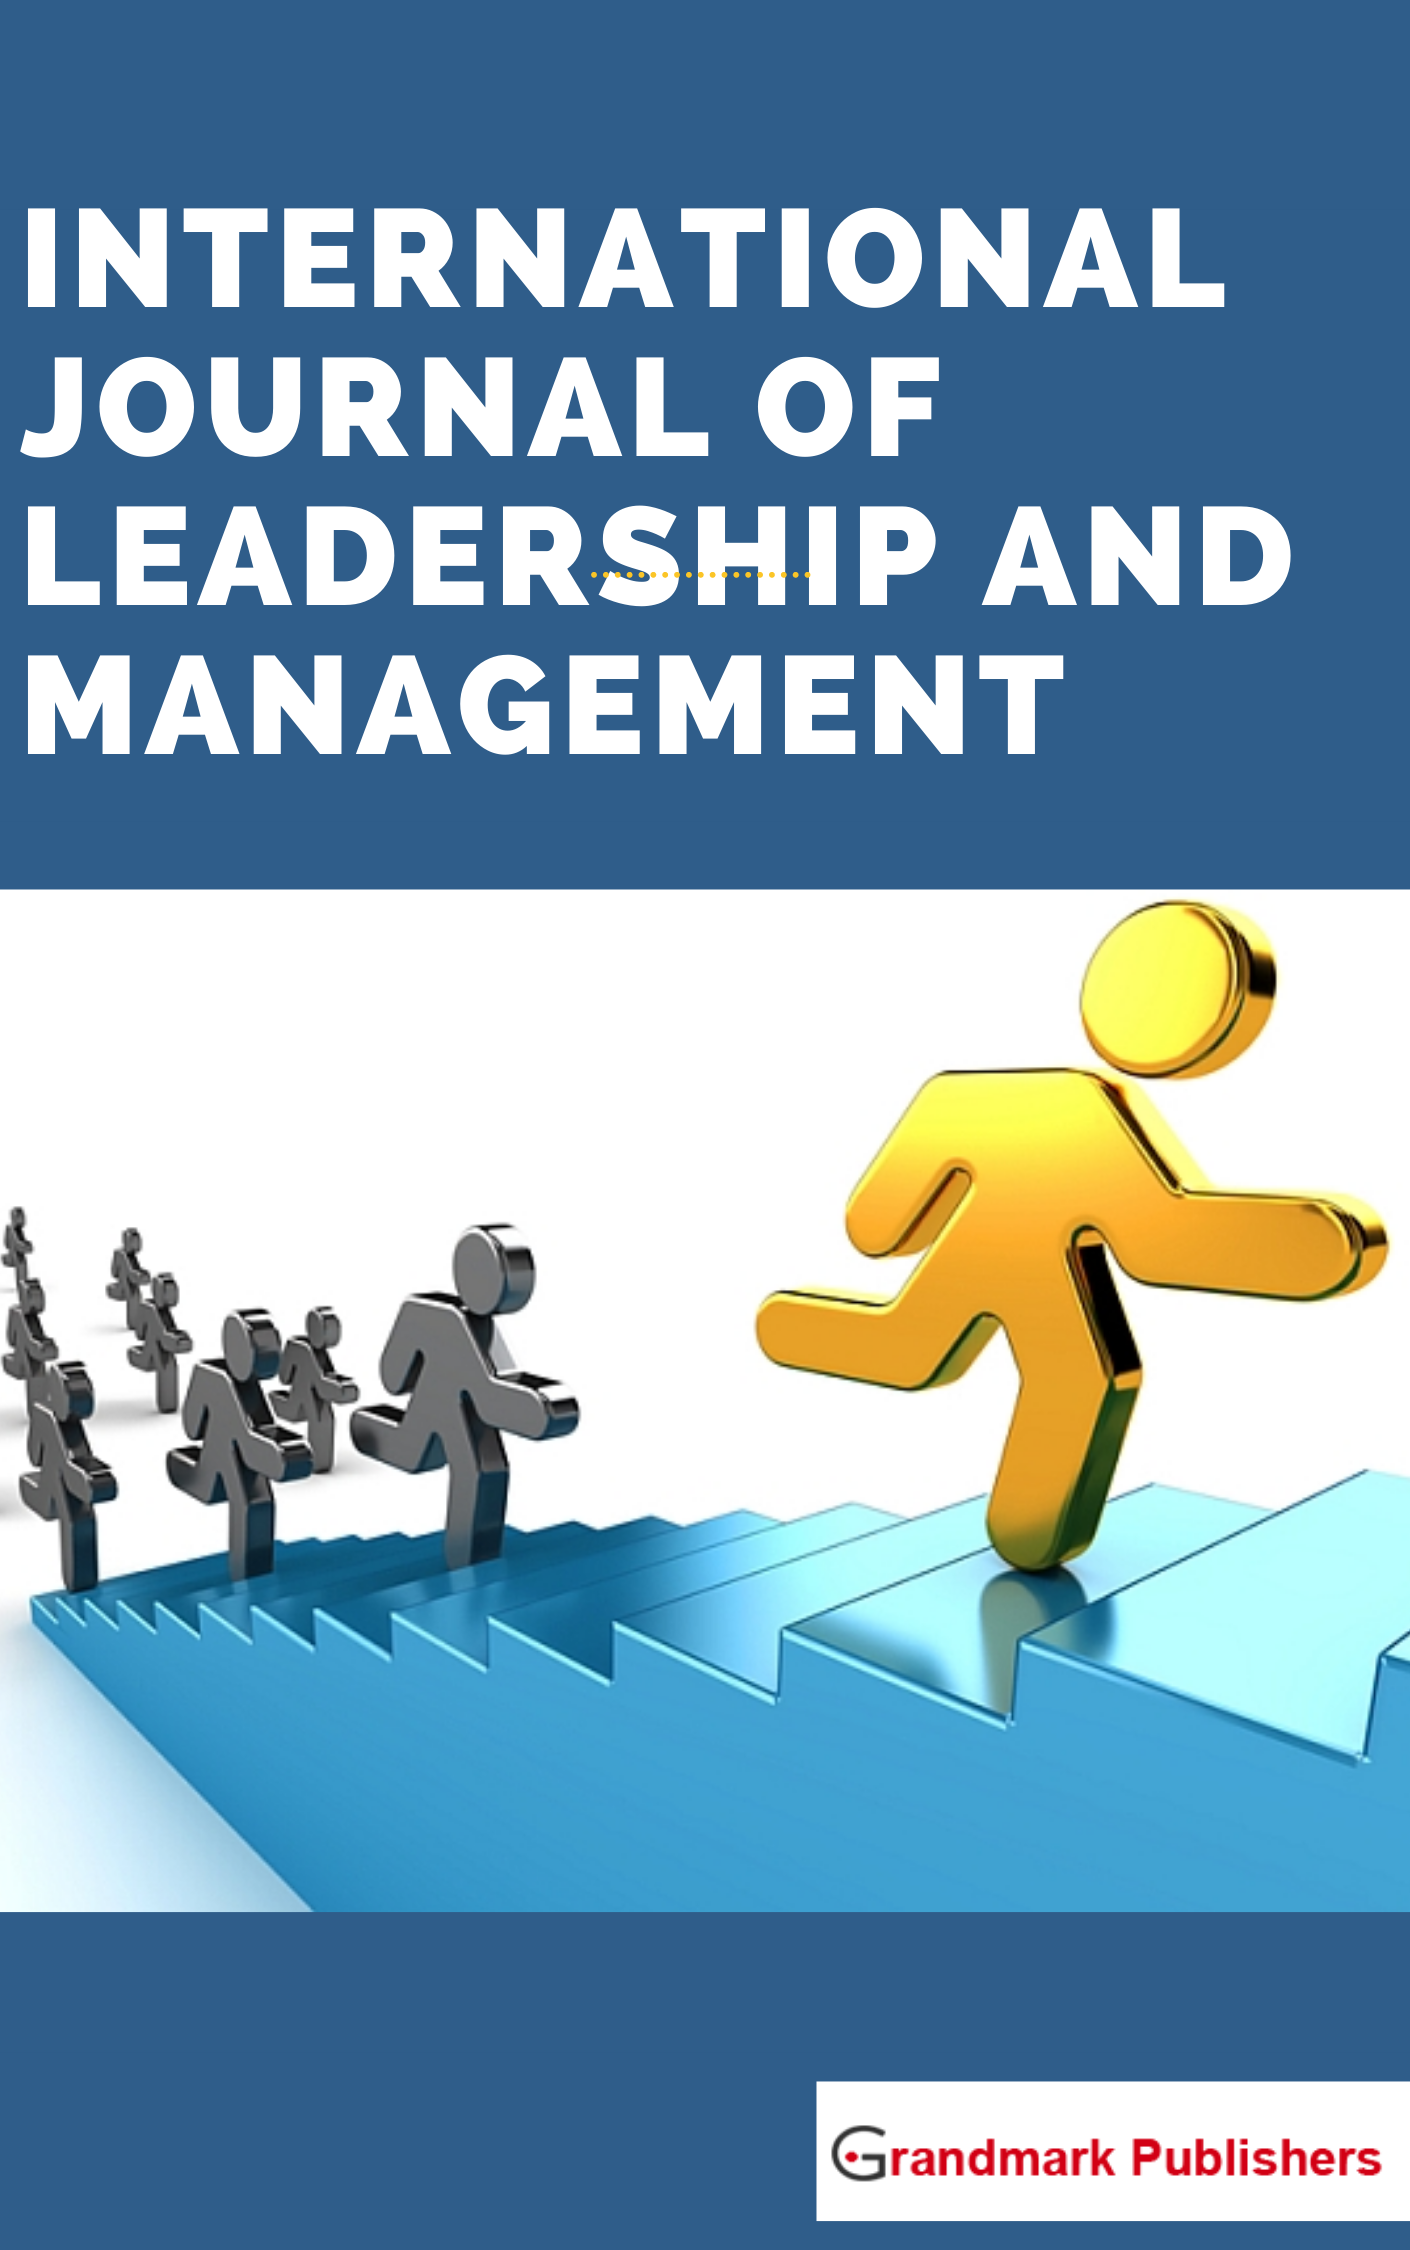 leadership research articles